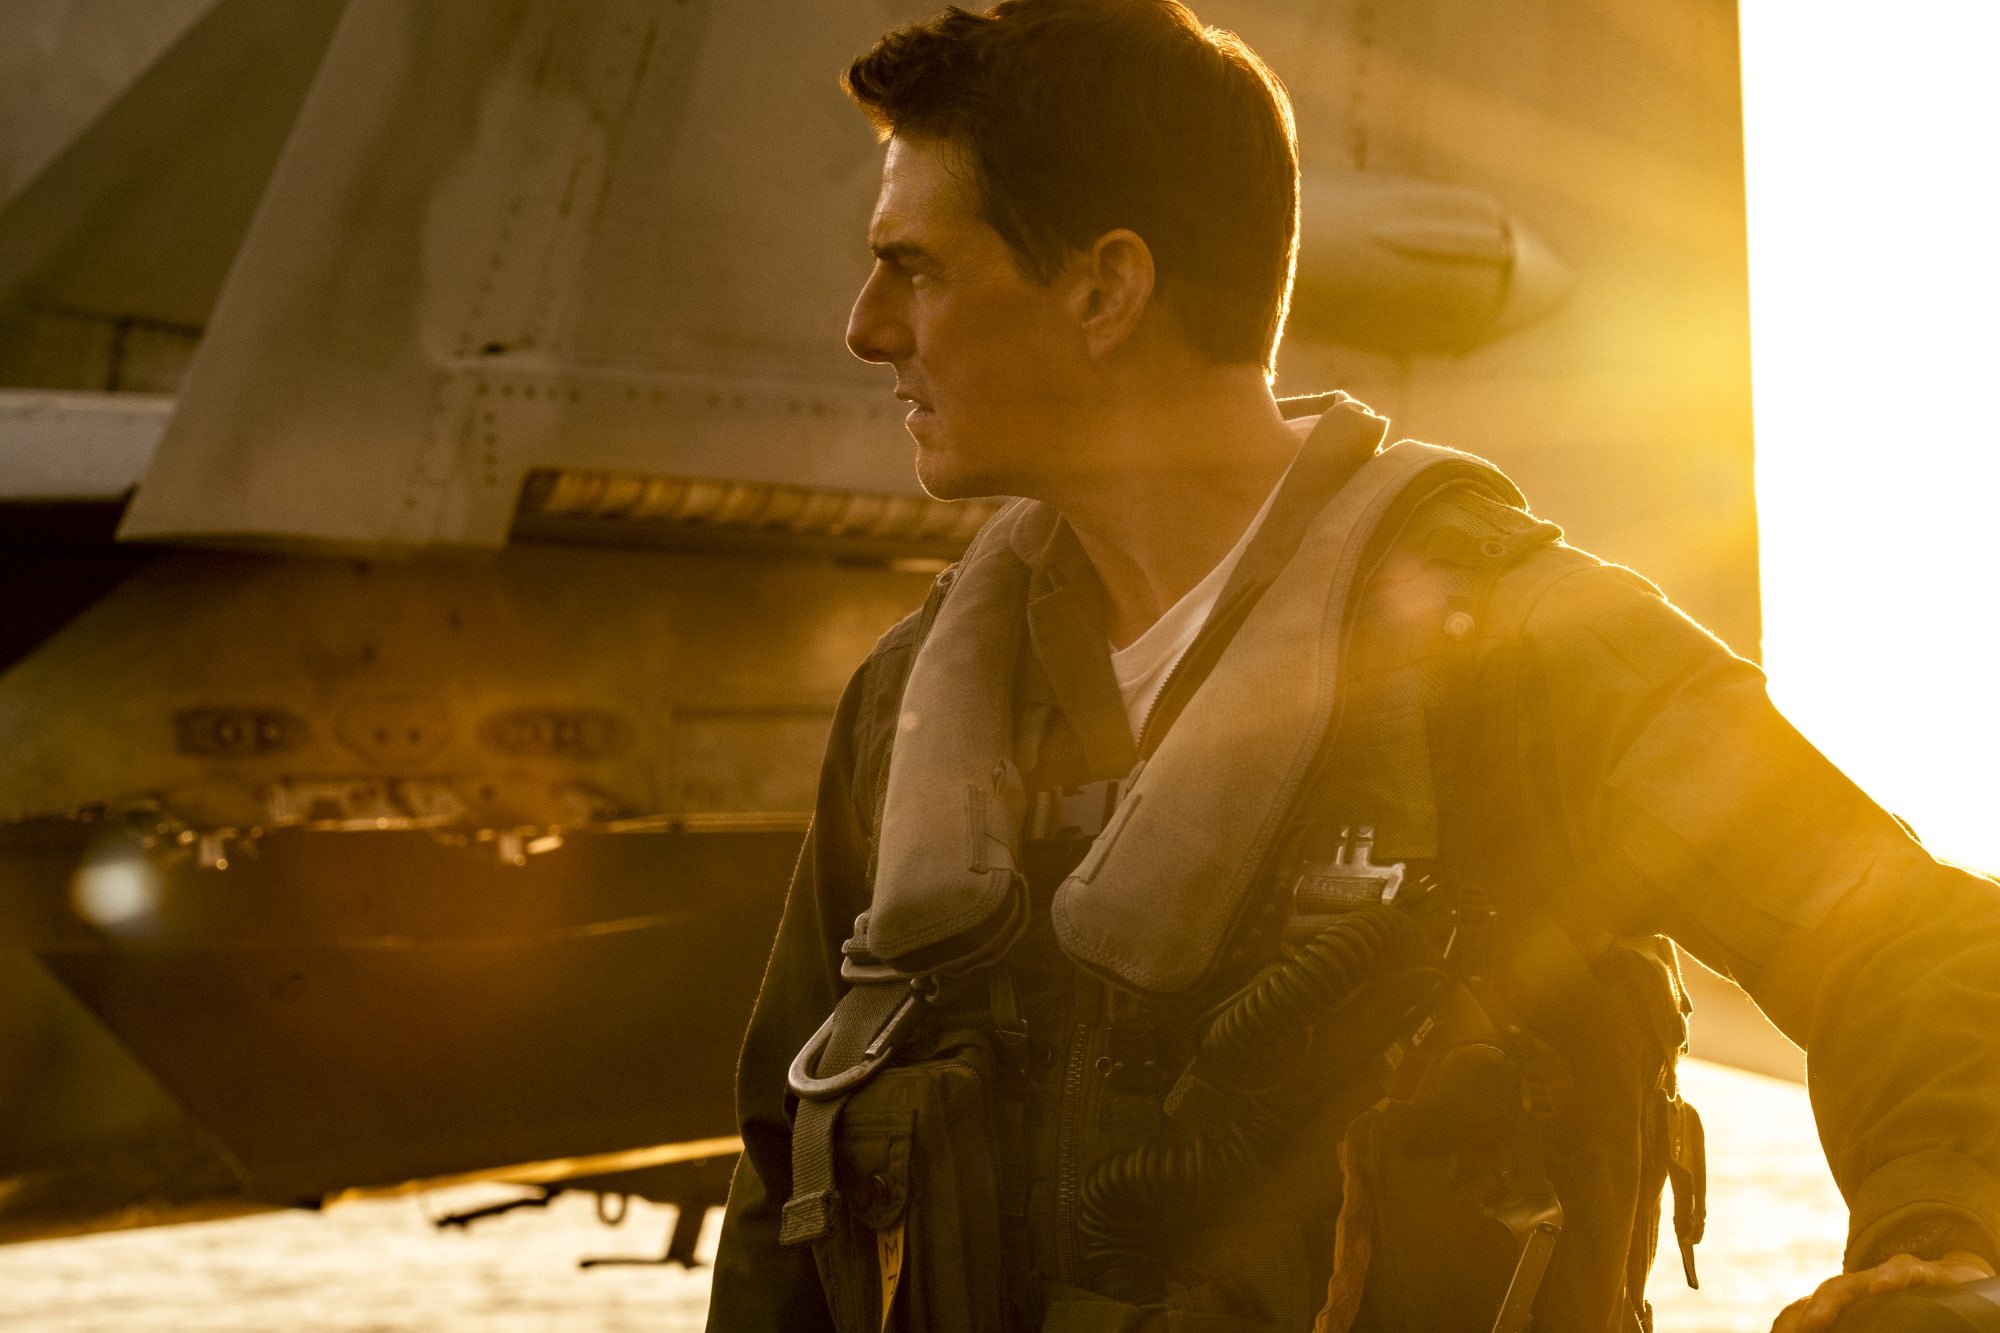 Top Gun Maverick movie review: Tom Cruise’s latest film is a love letter to cinema